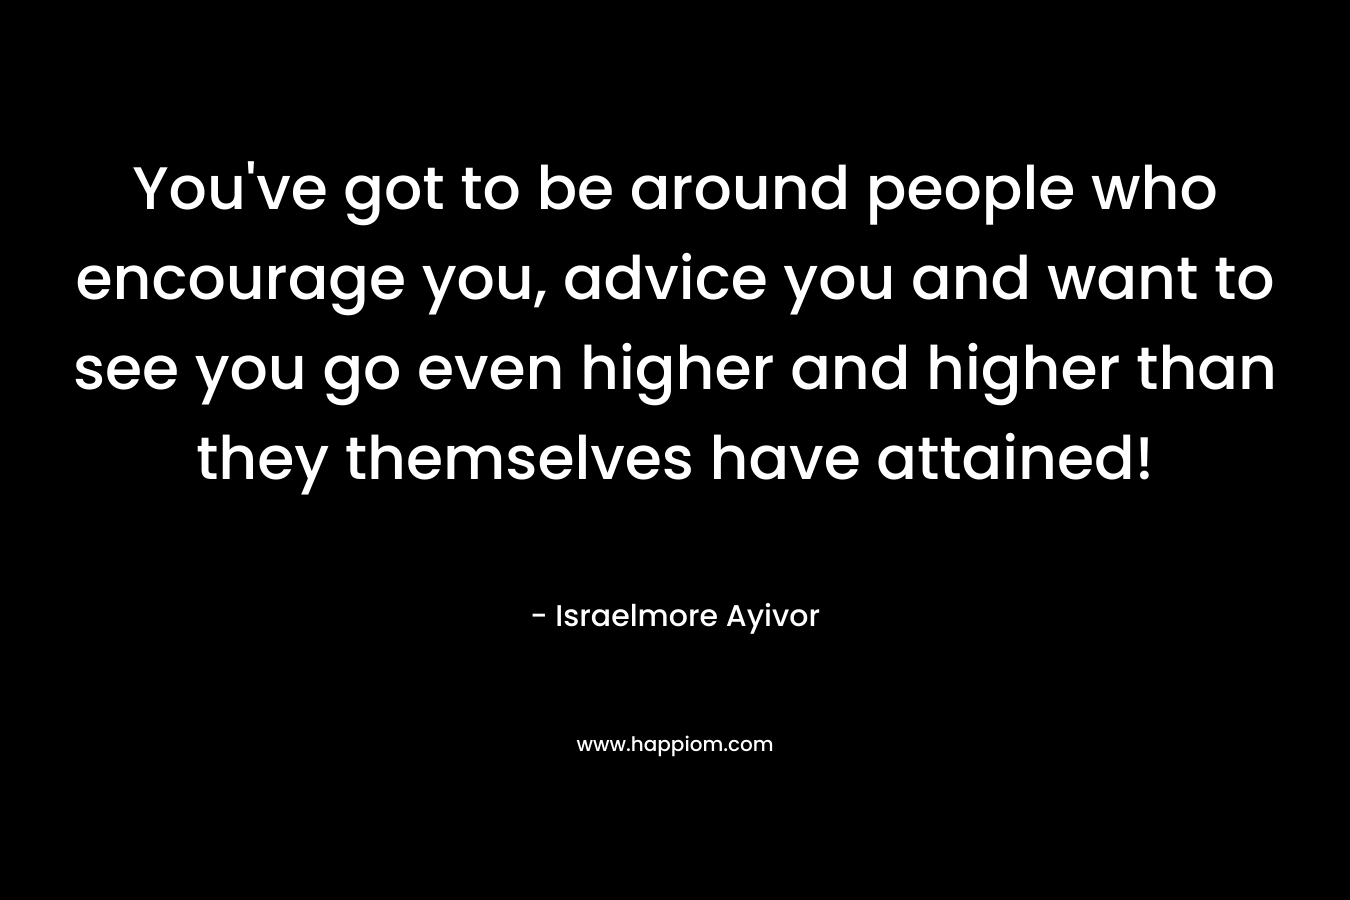 You've got to be around people who encourage you, advice you and want to see you go even higher and higher than they themselves have attained!